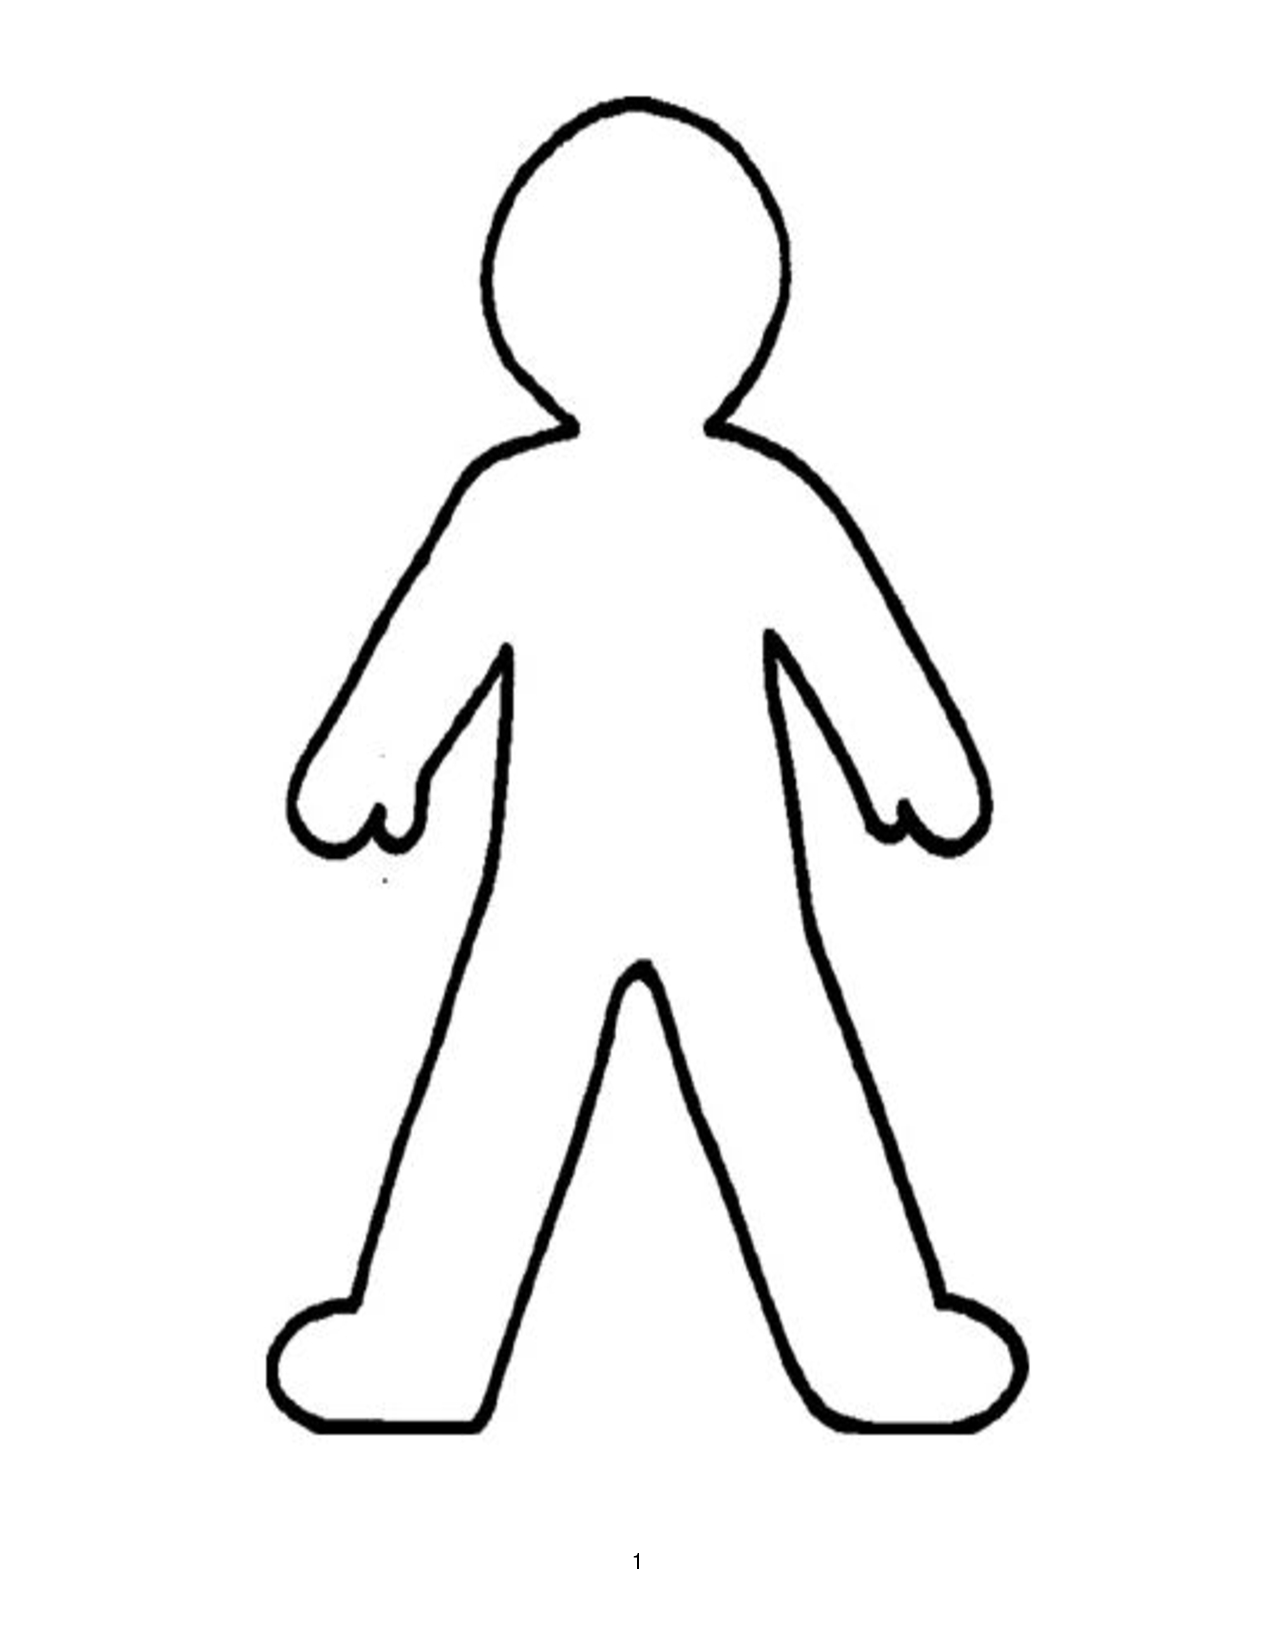 Doll Outline Template - Clipart Best | Printable | Pinterest - Free Printable Human Body Template